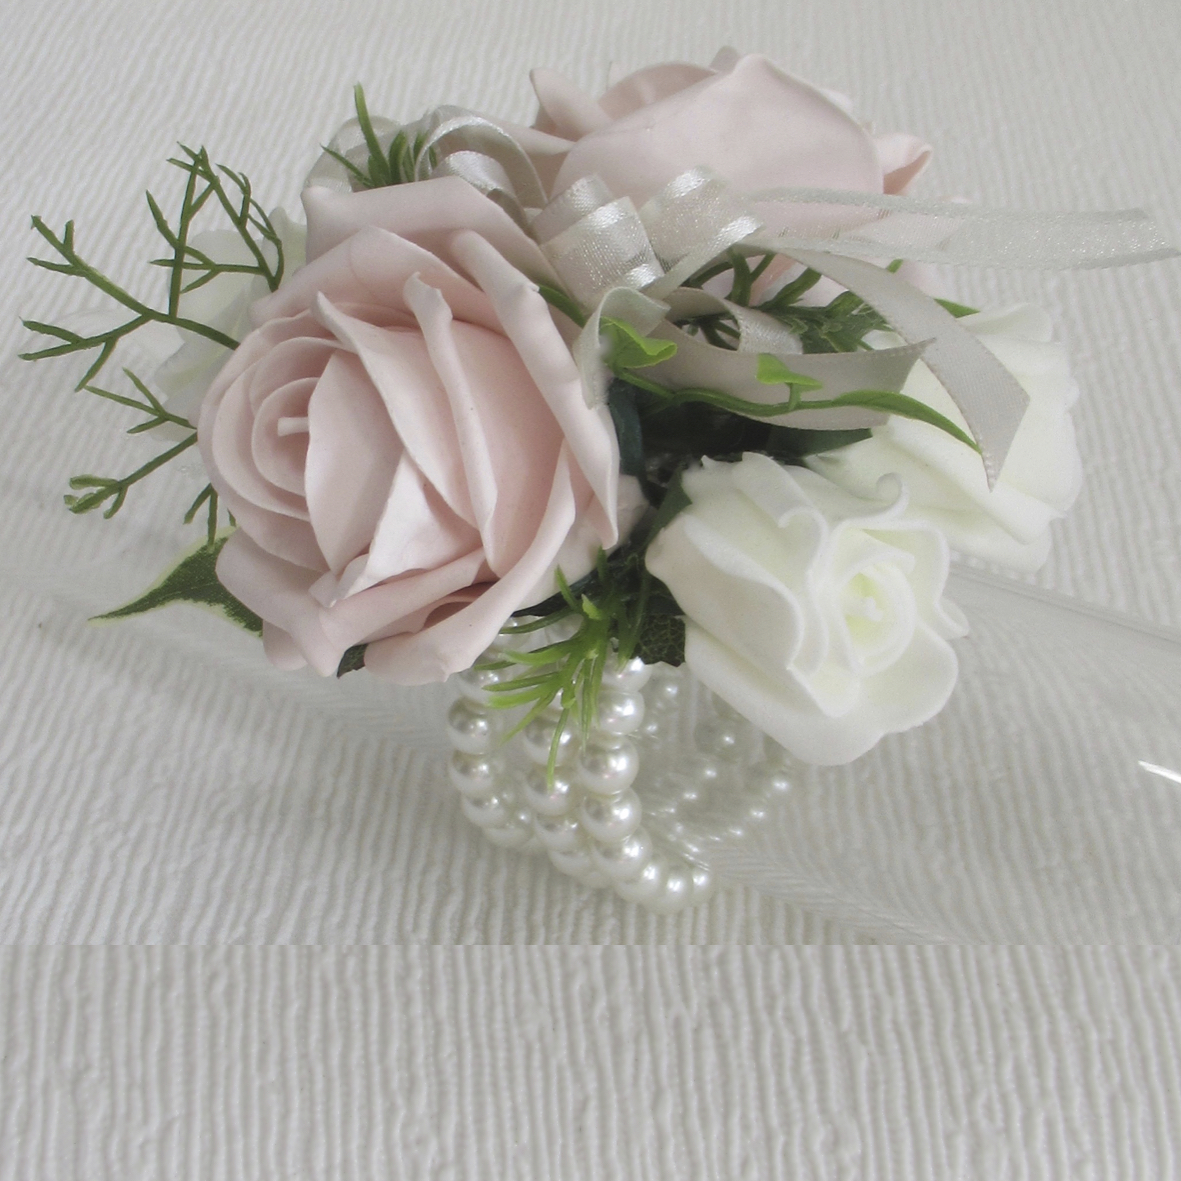 Blush, Nude and Ivory Wrist Corsage Prom Corsage, Wedding Corsage